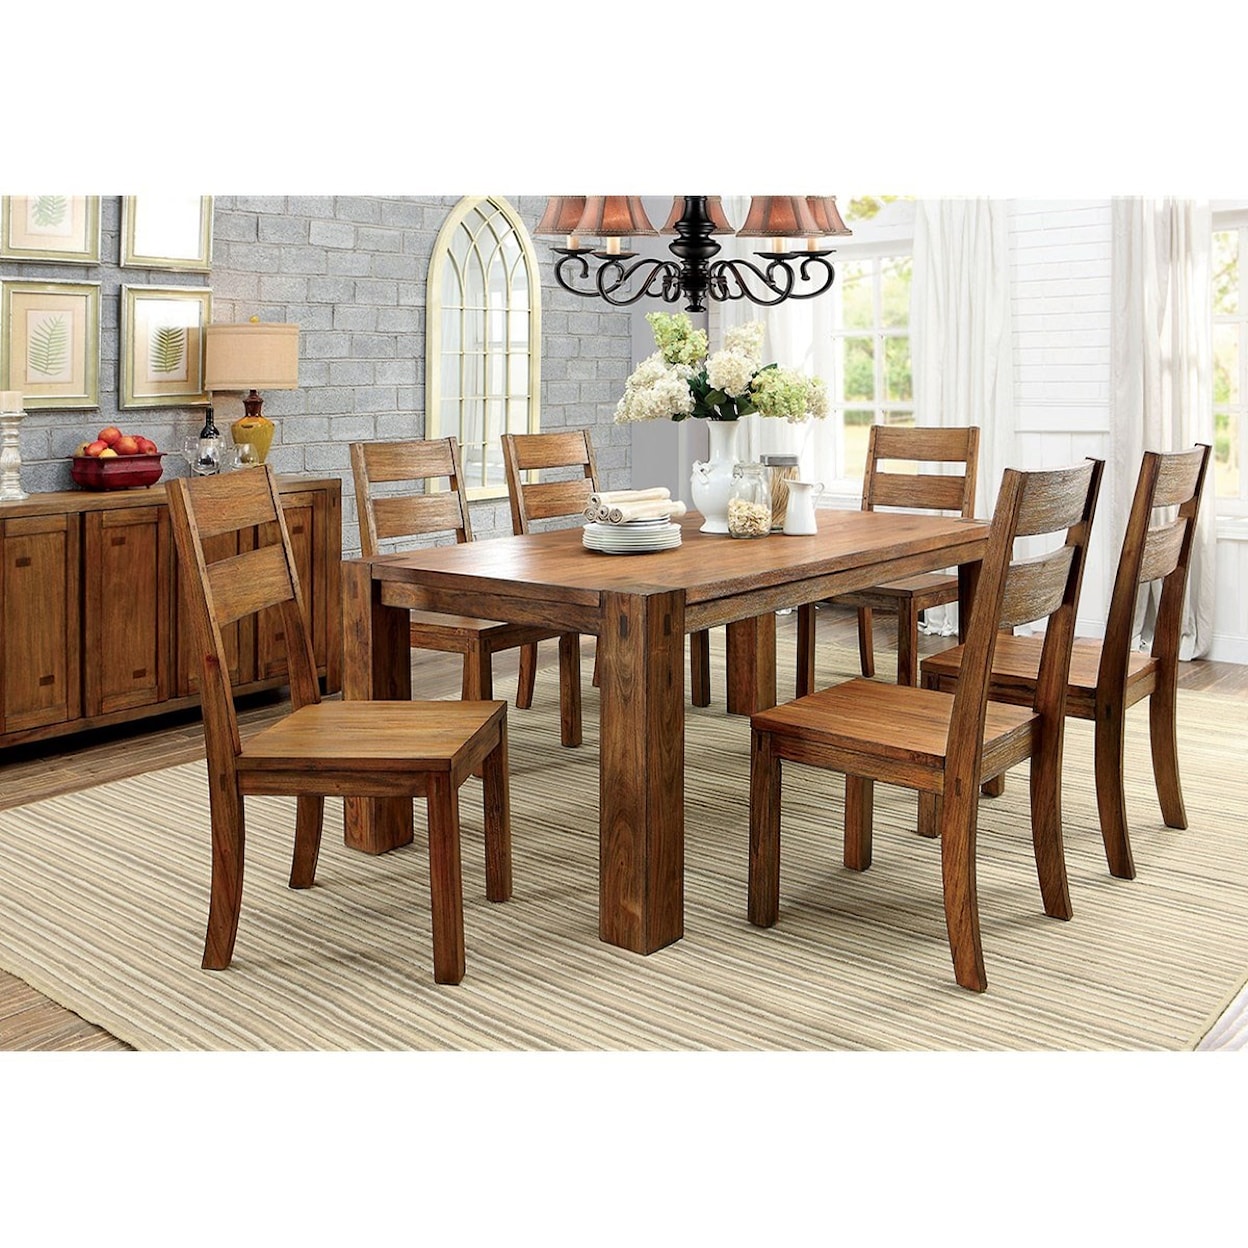 Furniture of America Frontier Table + 6 Side Chairs